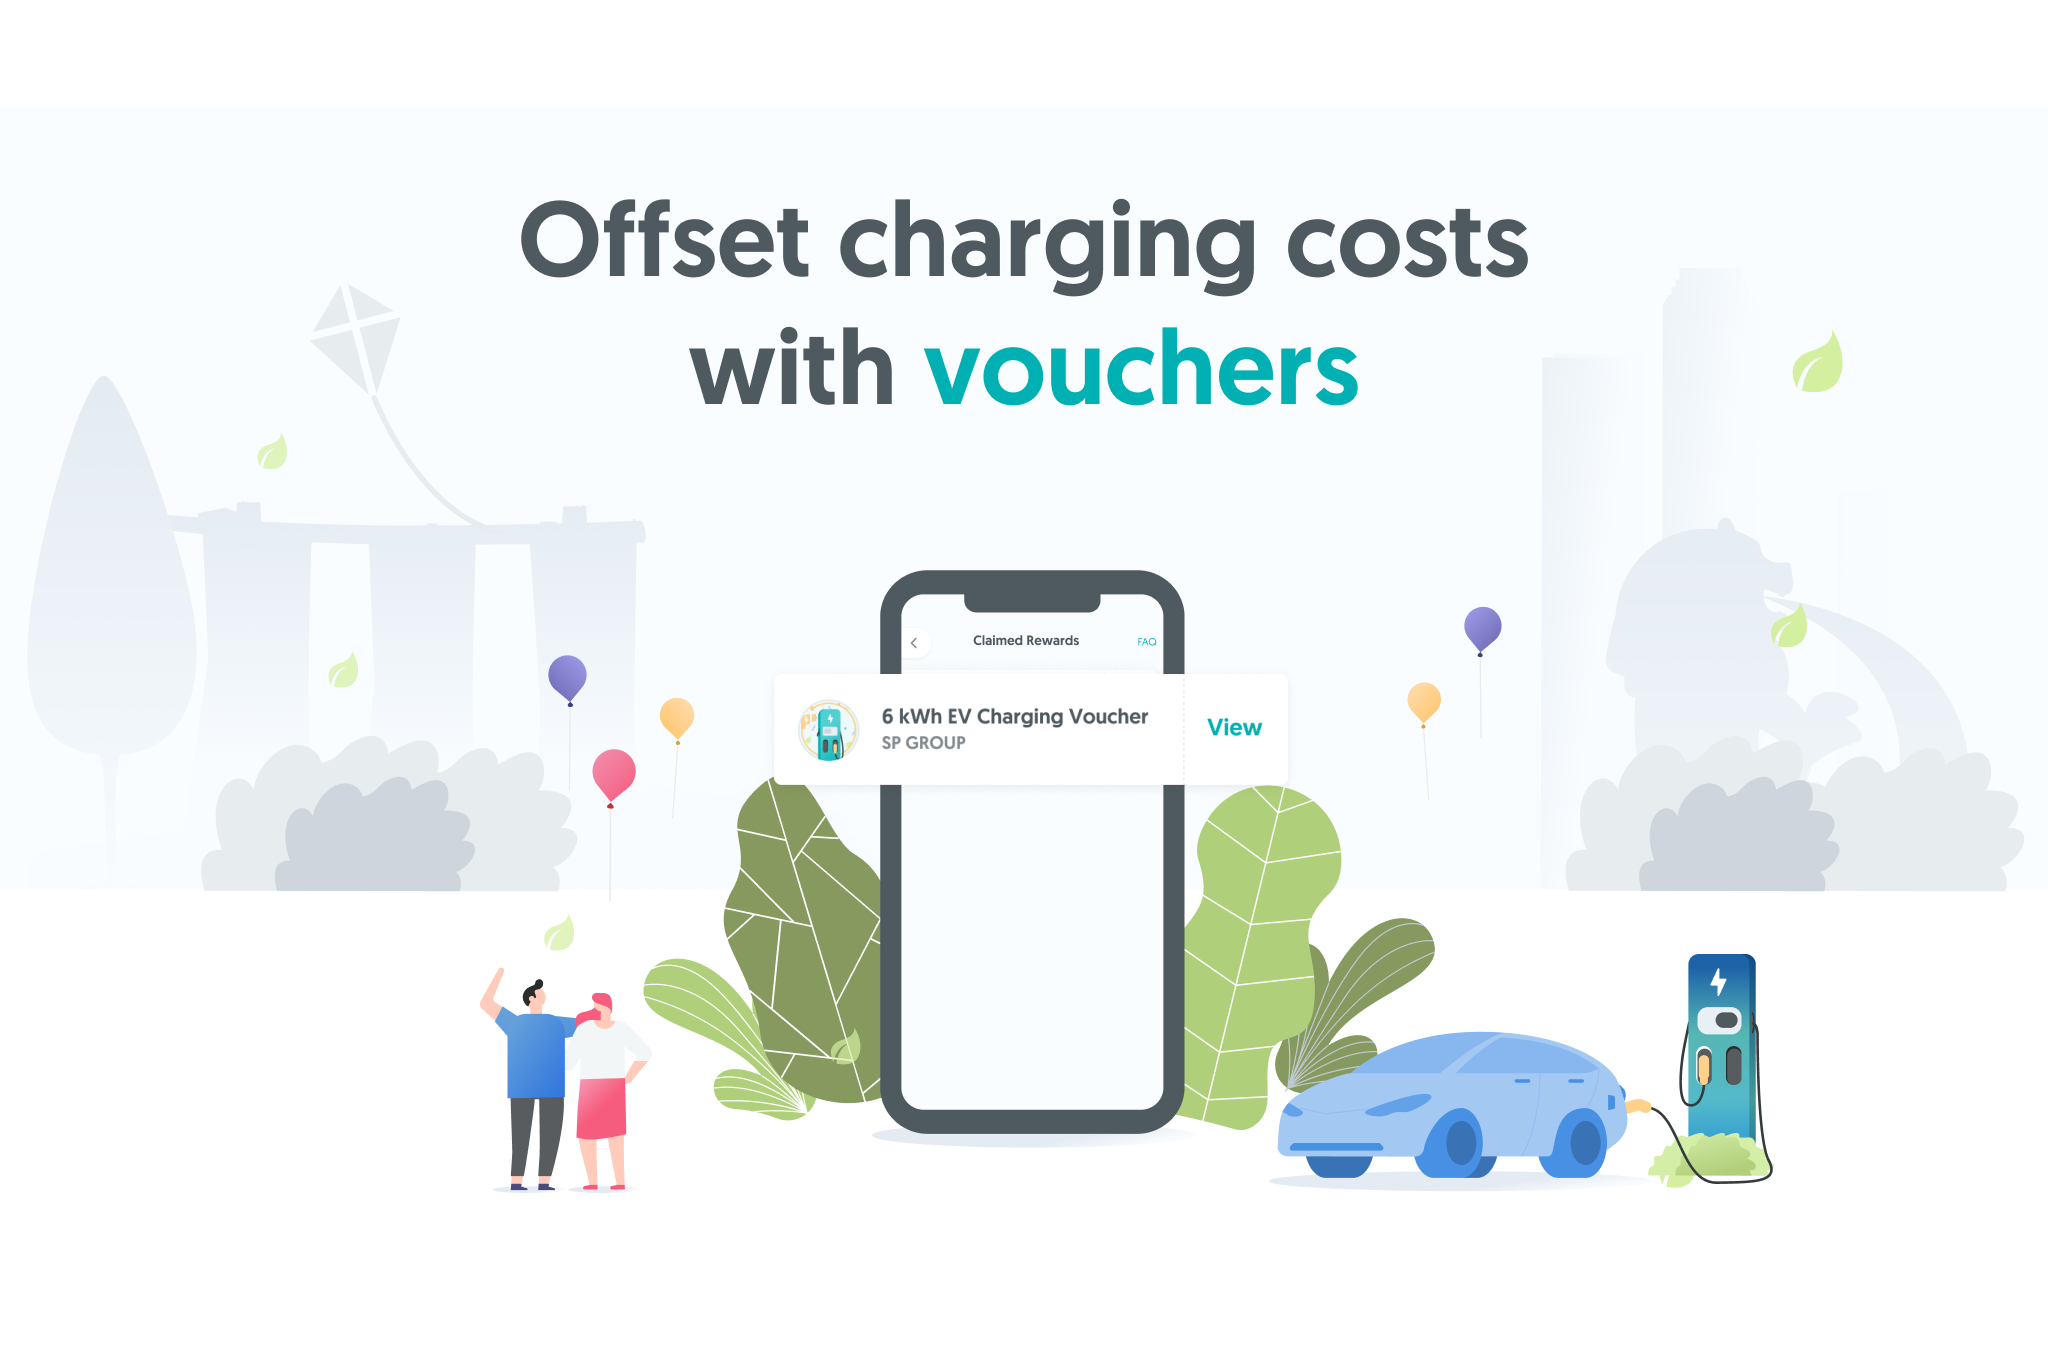 Register to receive, claim and use EV charging vouchers